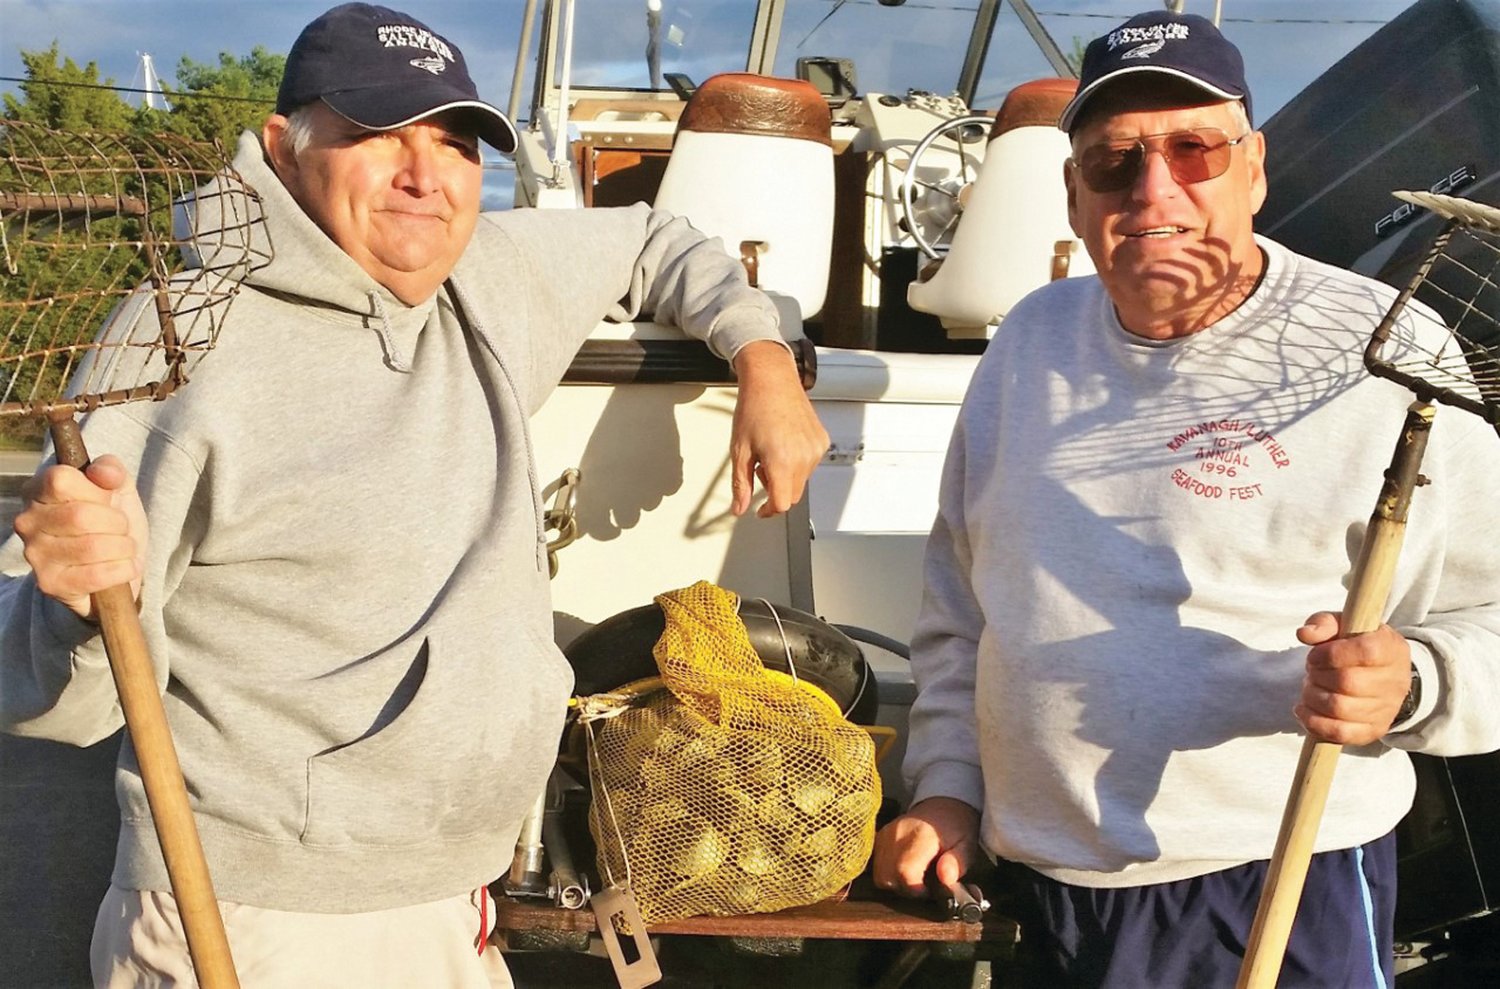 Friends Barry Fuller and Roger Tellier enjoy shellfishing for quahogs on Narragansett Bay, just as they have done for years.